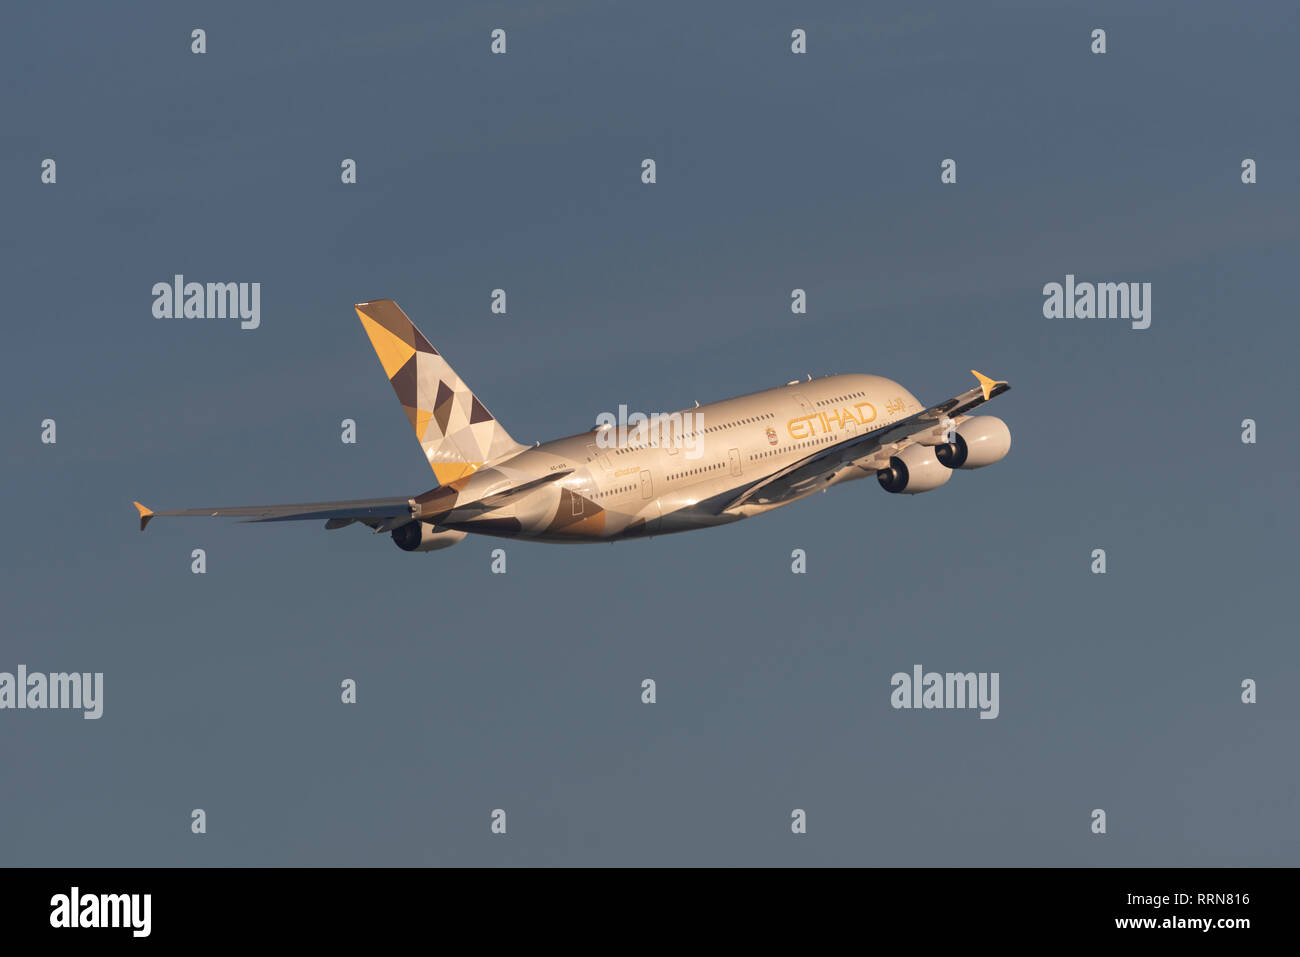 Etihad Airways Airbus A380 jet airliner plane A6-APB taking off from London Heathrow Airport, UK. Airline flight departure Stock Photo